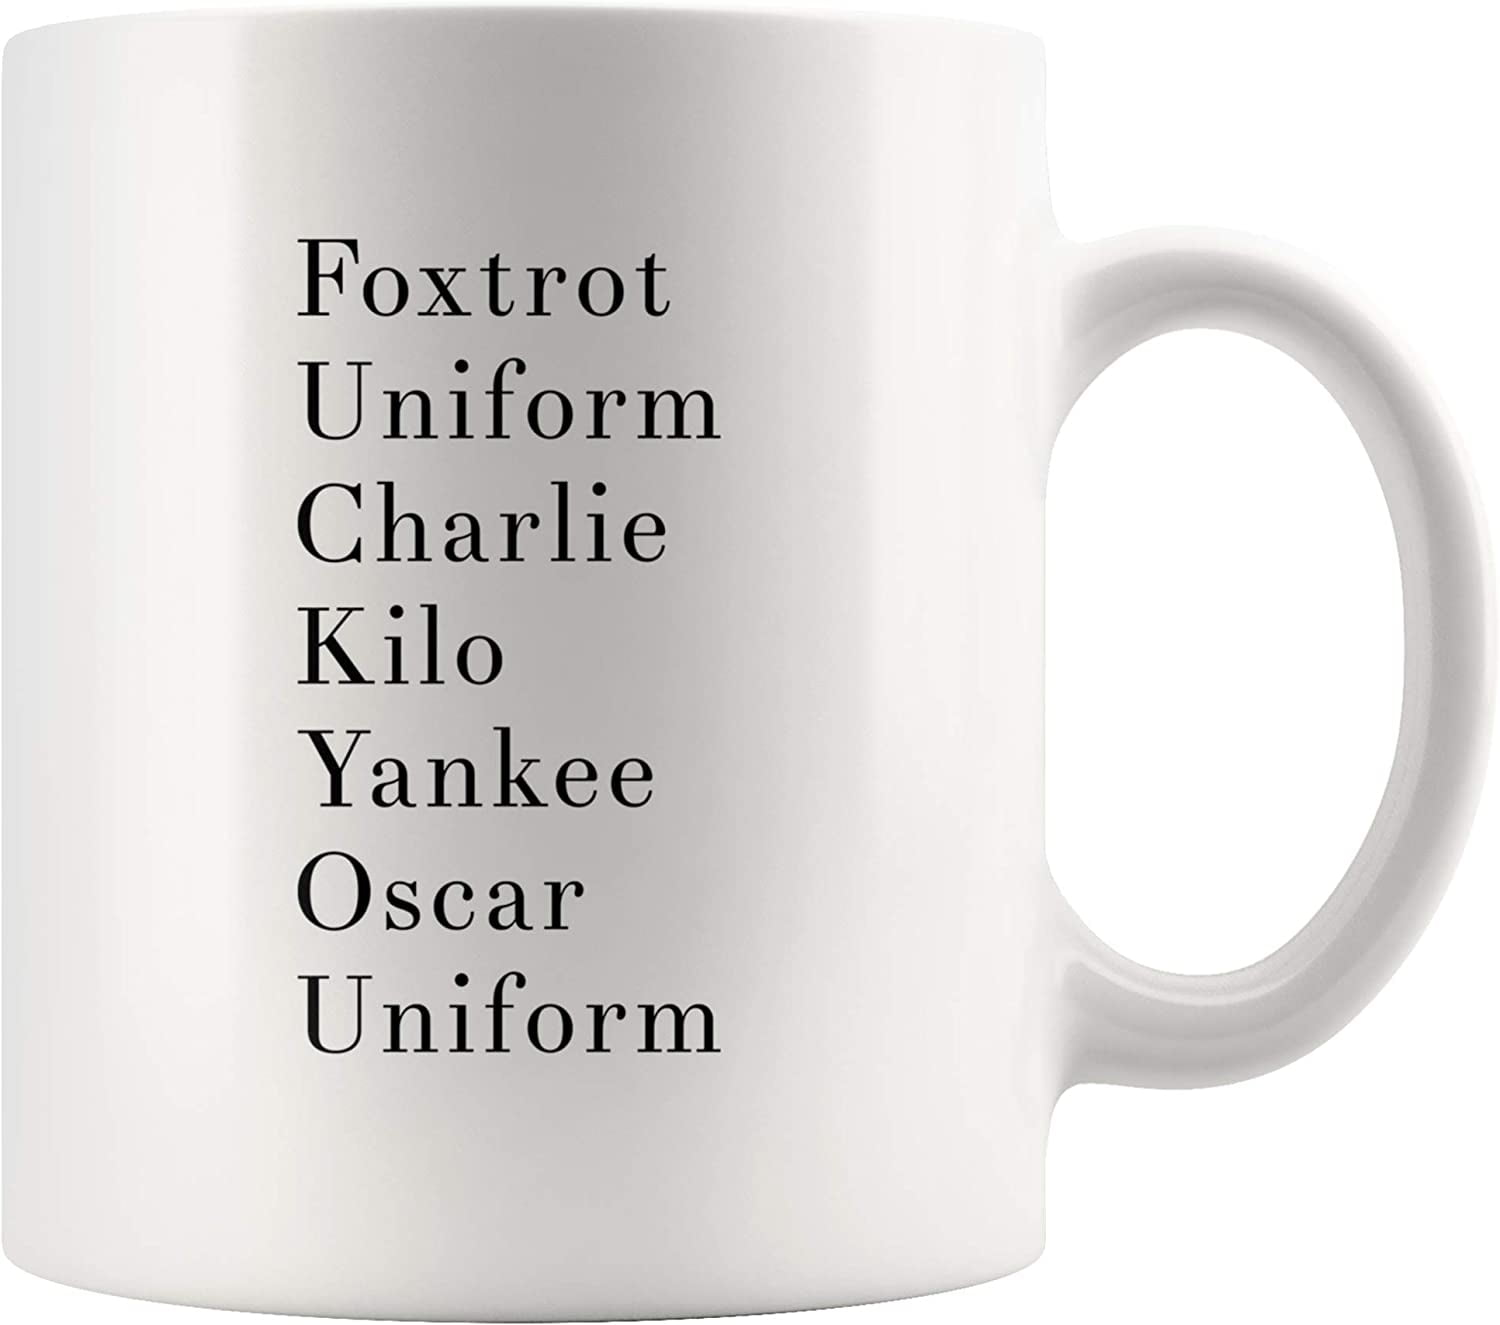 Funny Coffee Mug Military Alphabet Novelty Cup 1 Ounces Ceramic Tea Espresso  Cups Adult Humor Gag Gift for Soldiers Army Student Husband Wife Boyfriend  Girlfriend White Mugs 